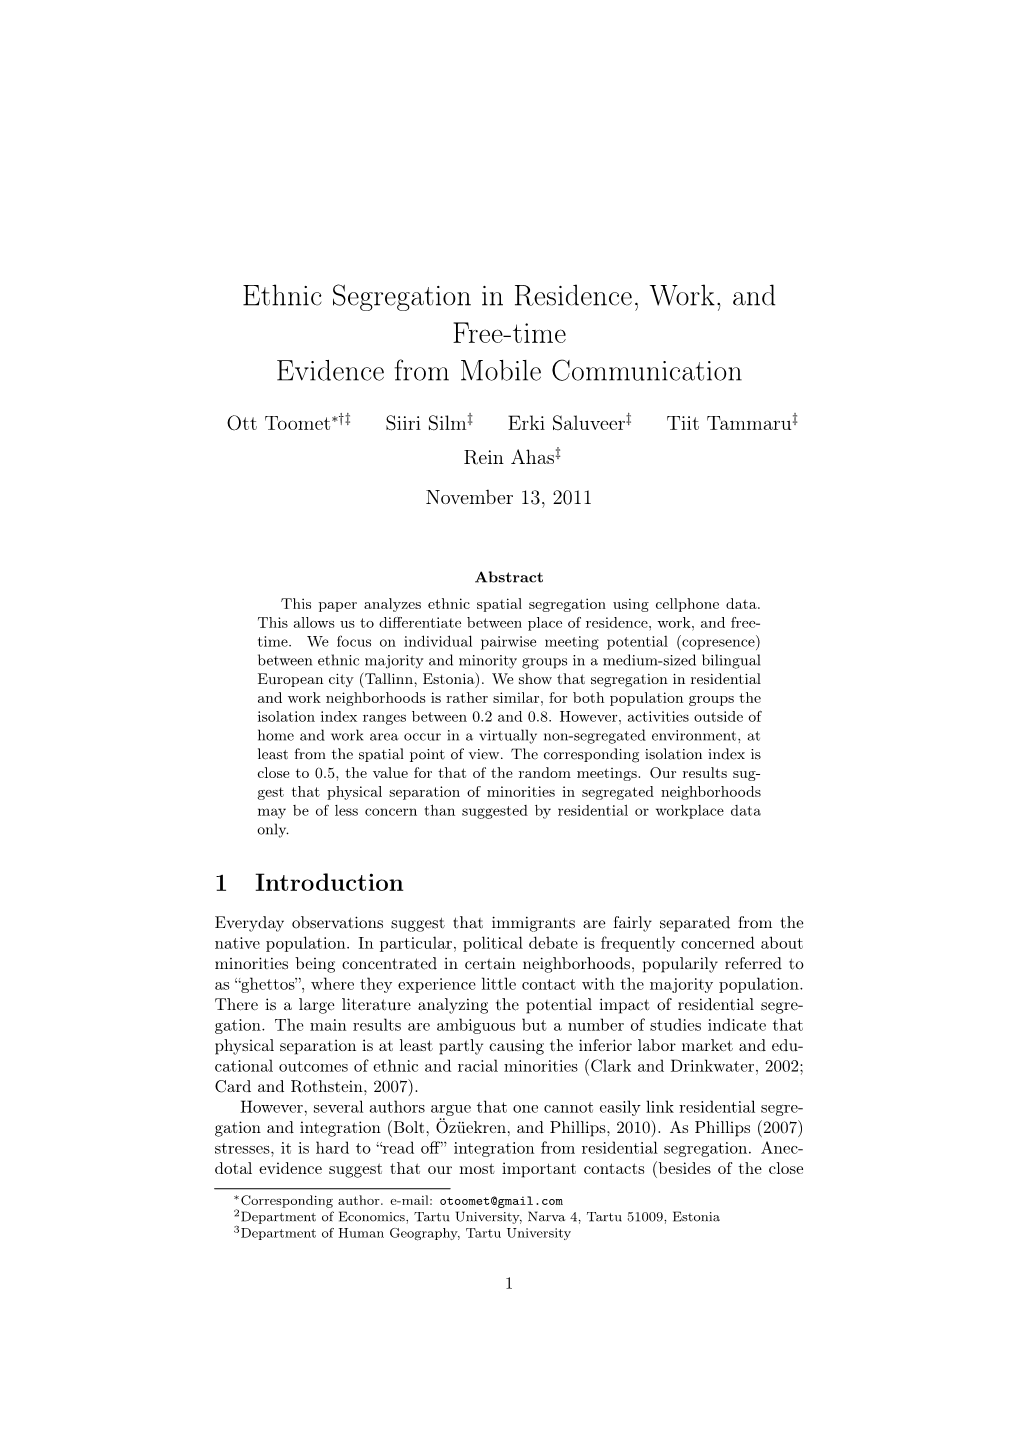 Ethnic Segregation in Residence, Work, and Free-Time Evidence from Mobile Communication